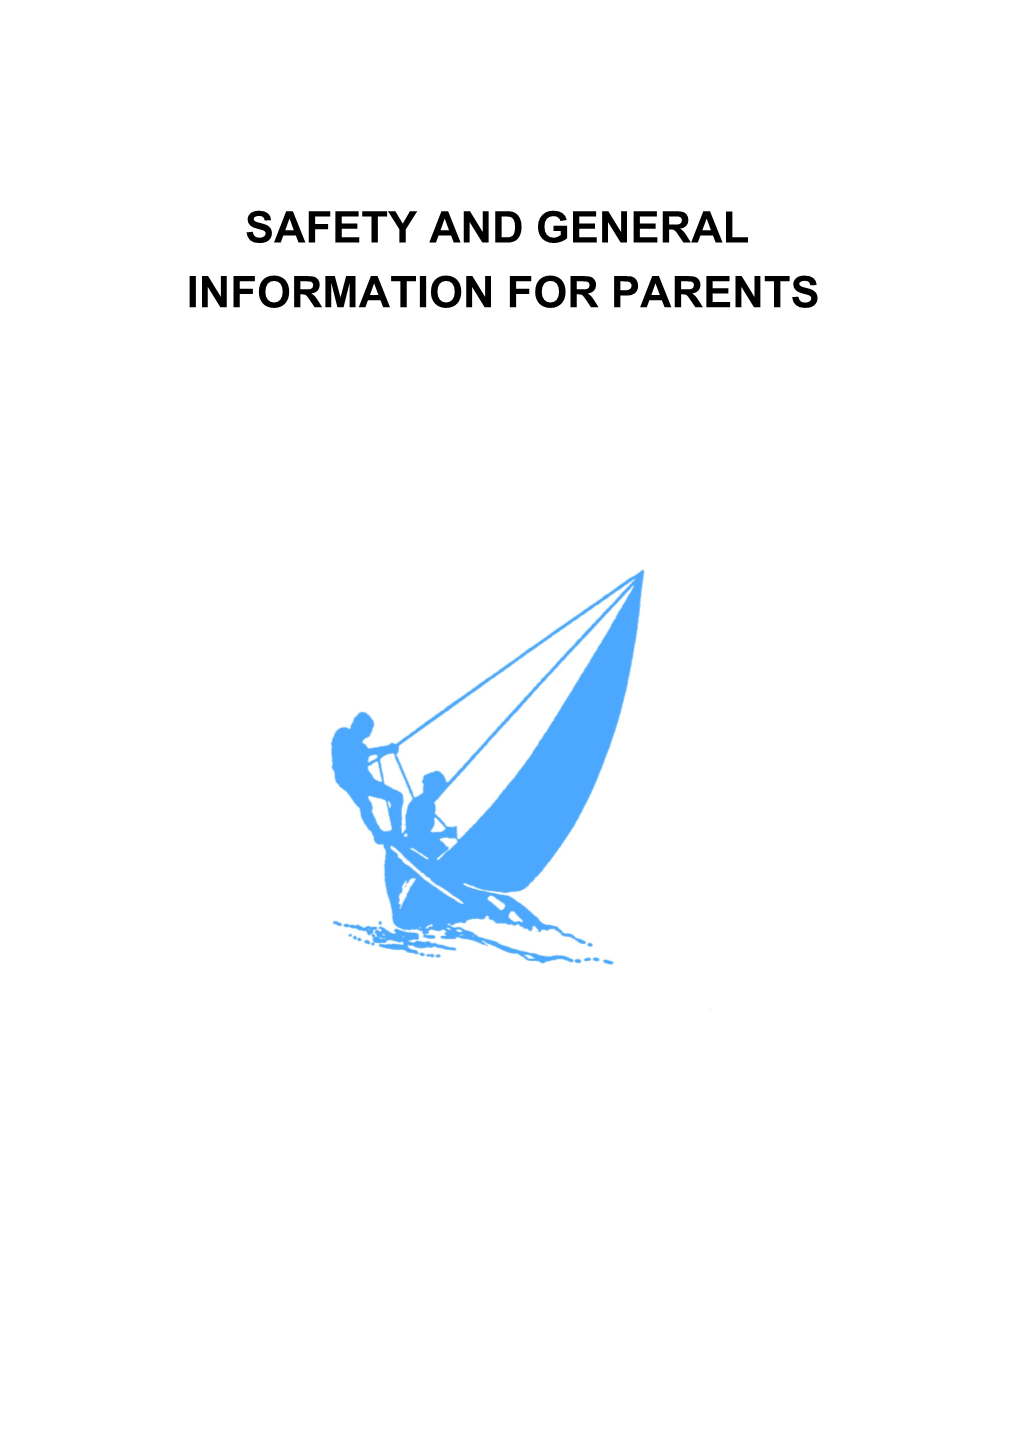 Safety and General Information for Parents